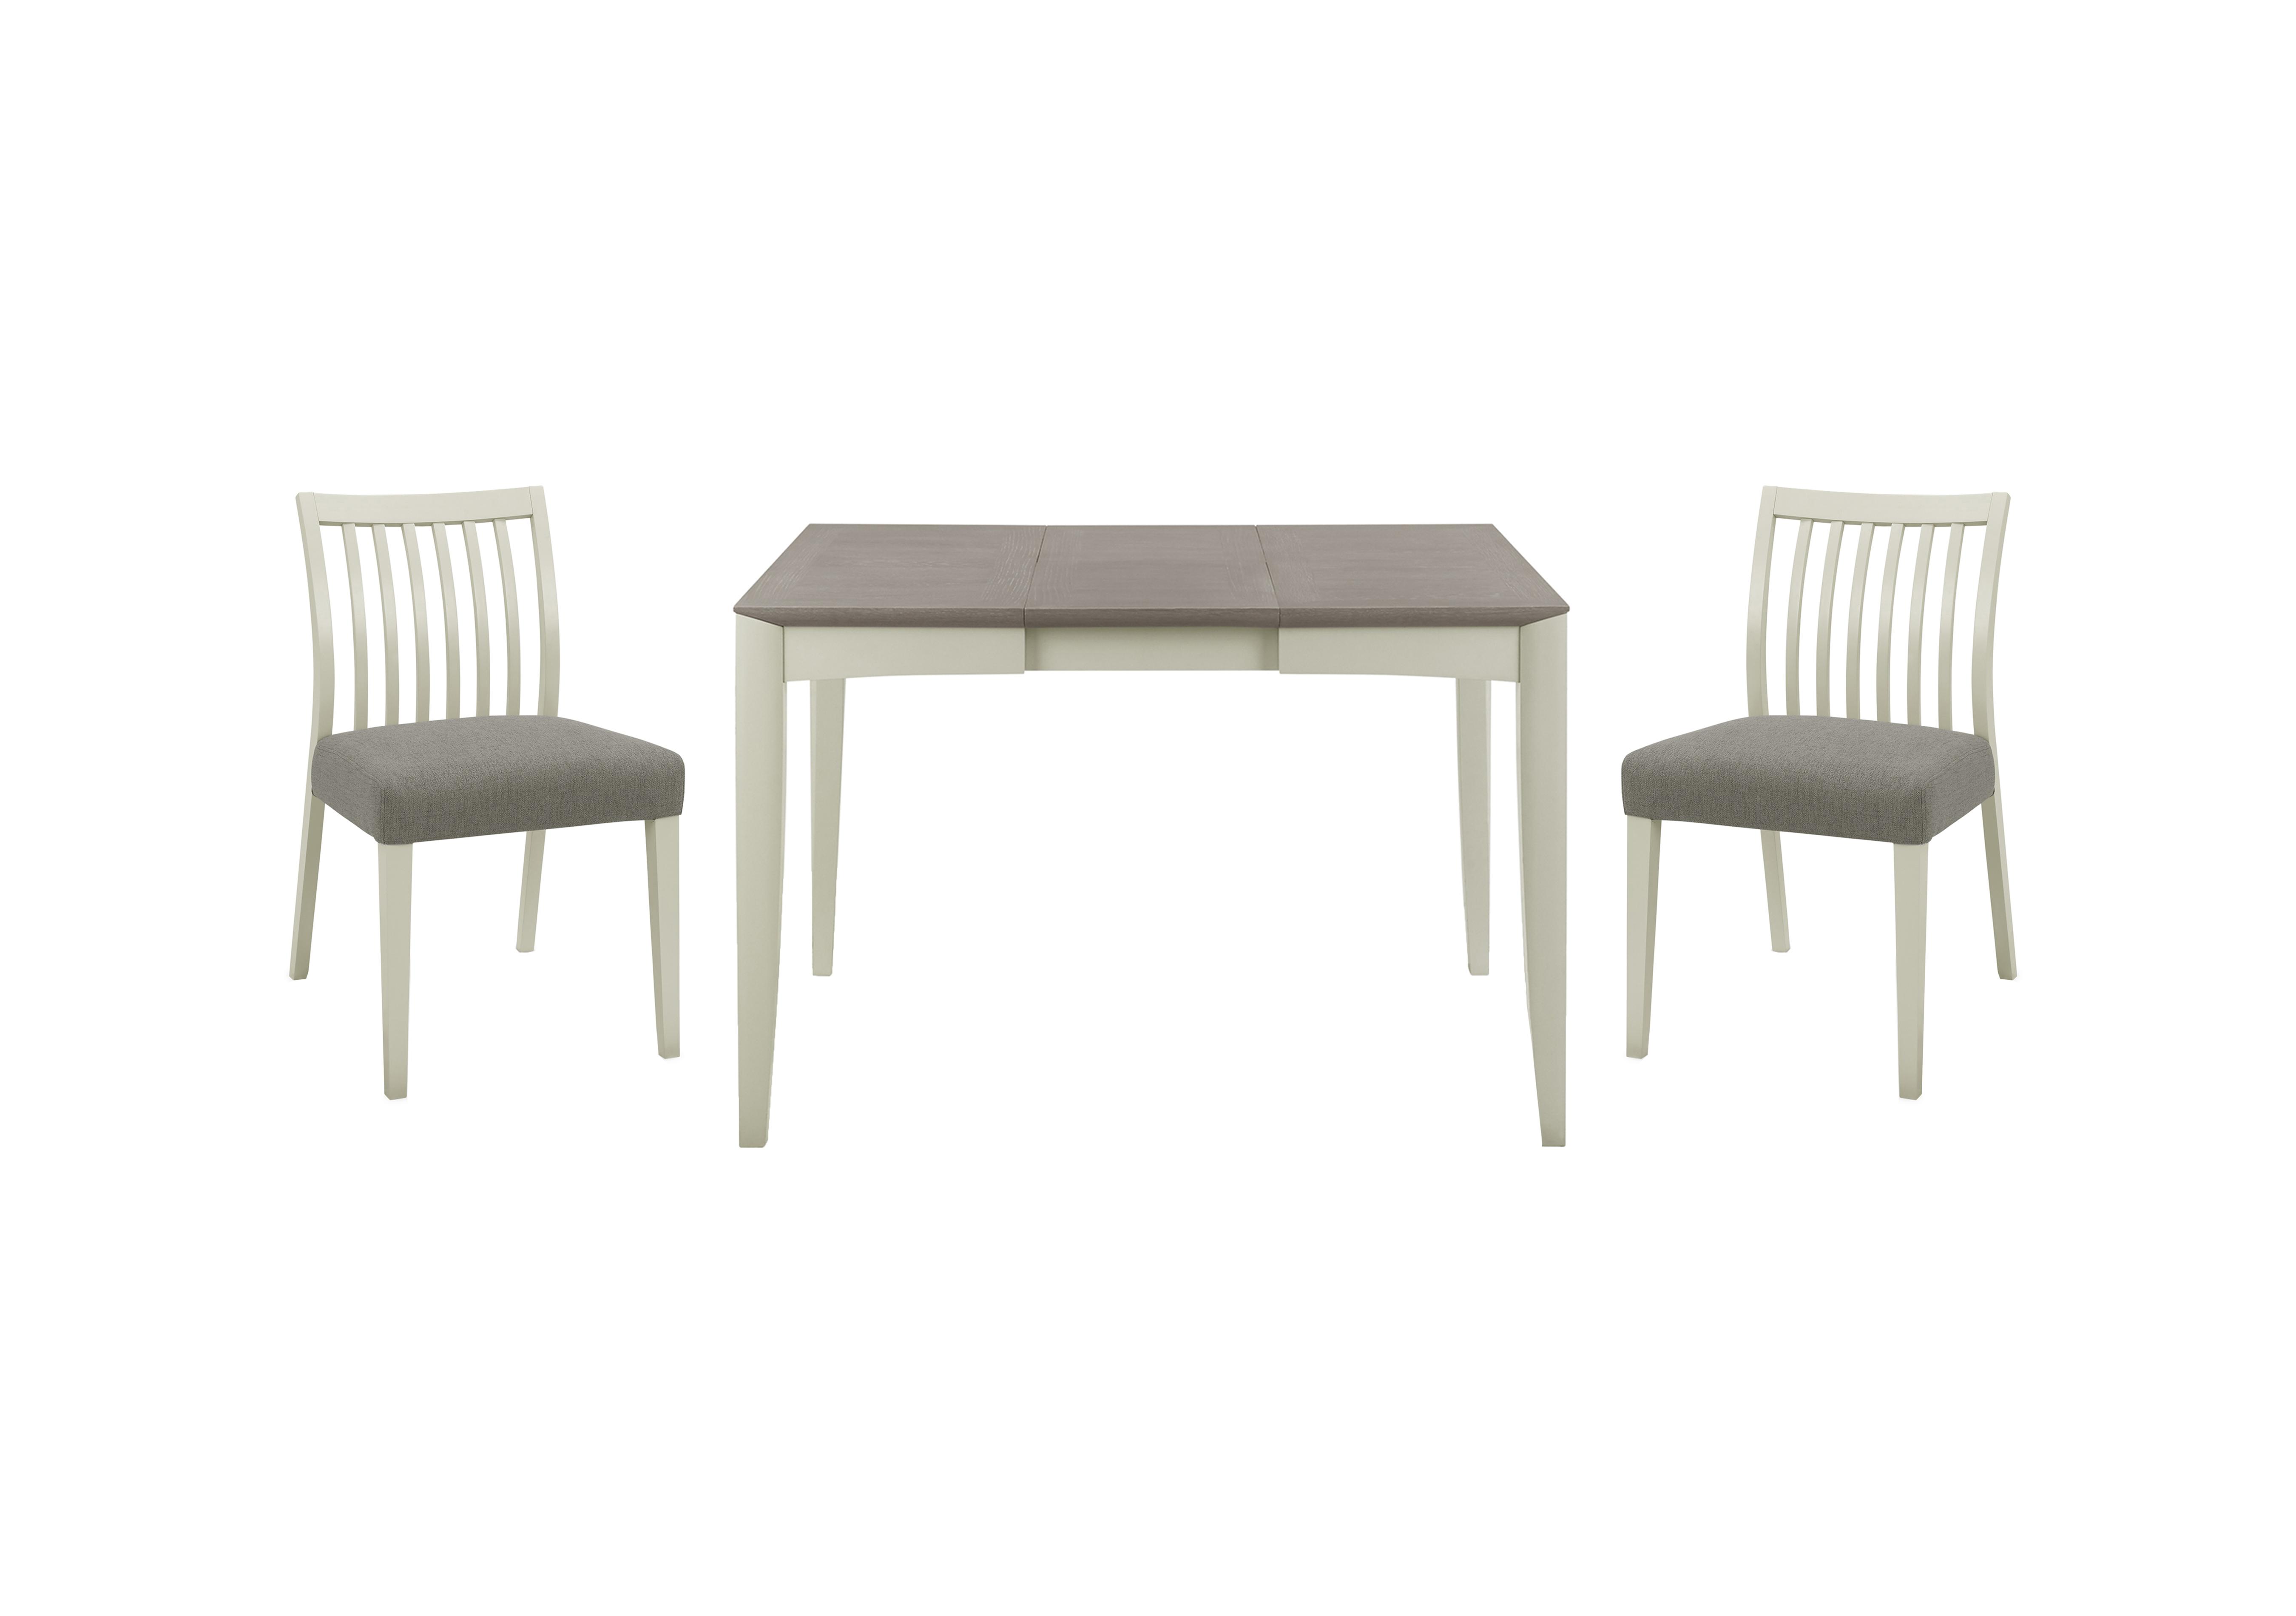 Skye Small Table and 2 Slatted Chairs in Two Tone/Titanium on Furniture Village